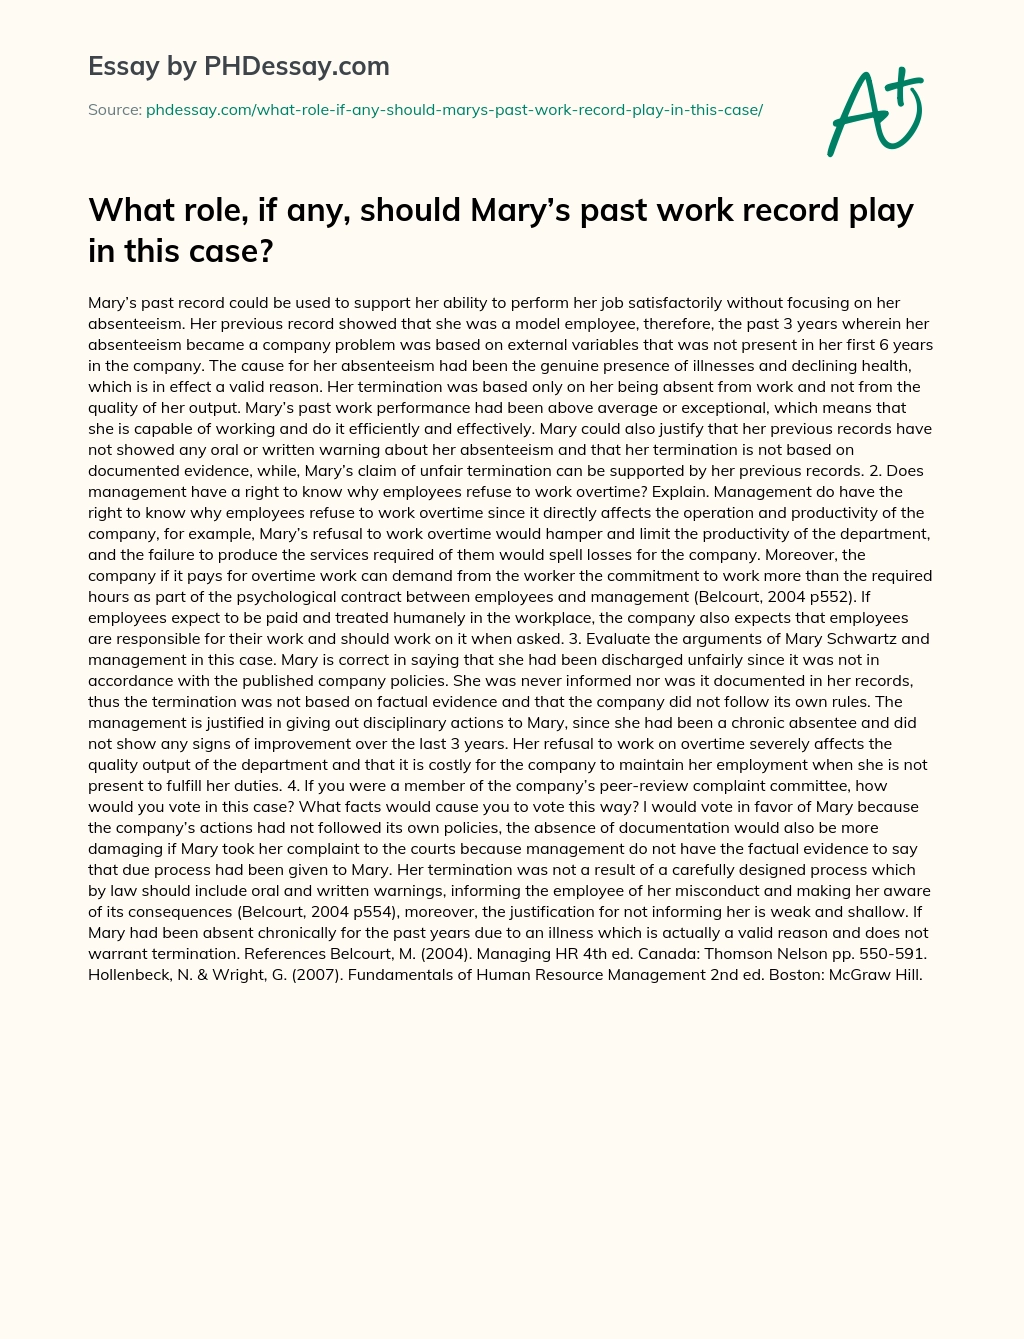 What role, if any, should Mary’s past work record play in this case? essay